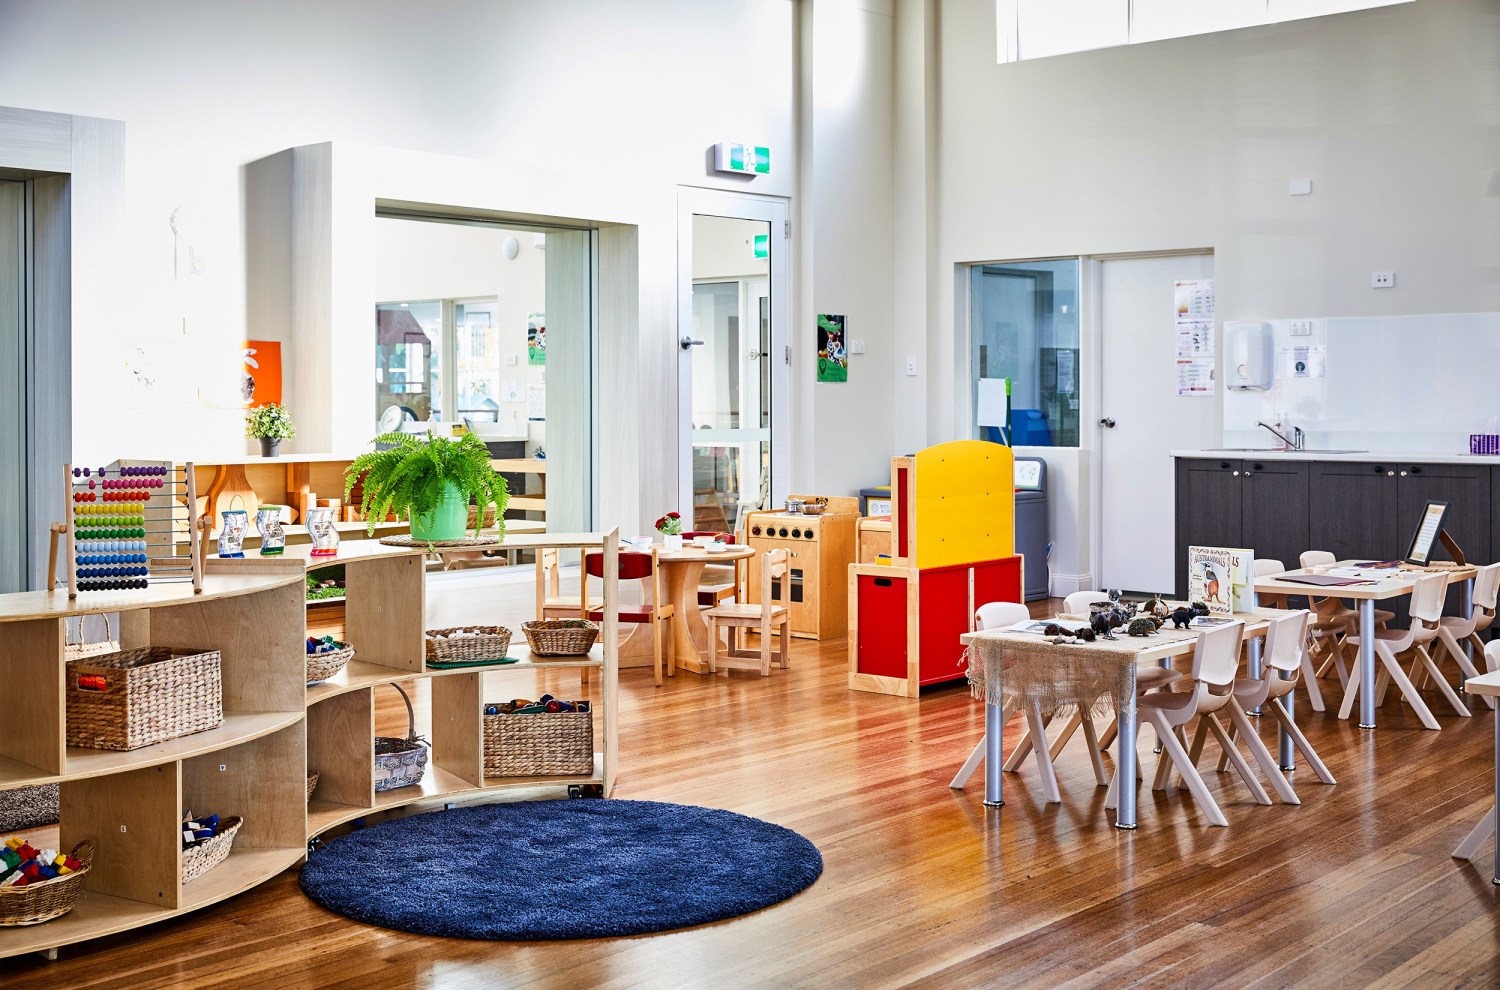 Interior photography of an upmarket child care center play room